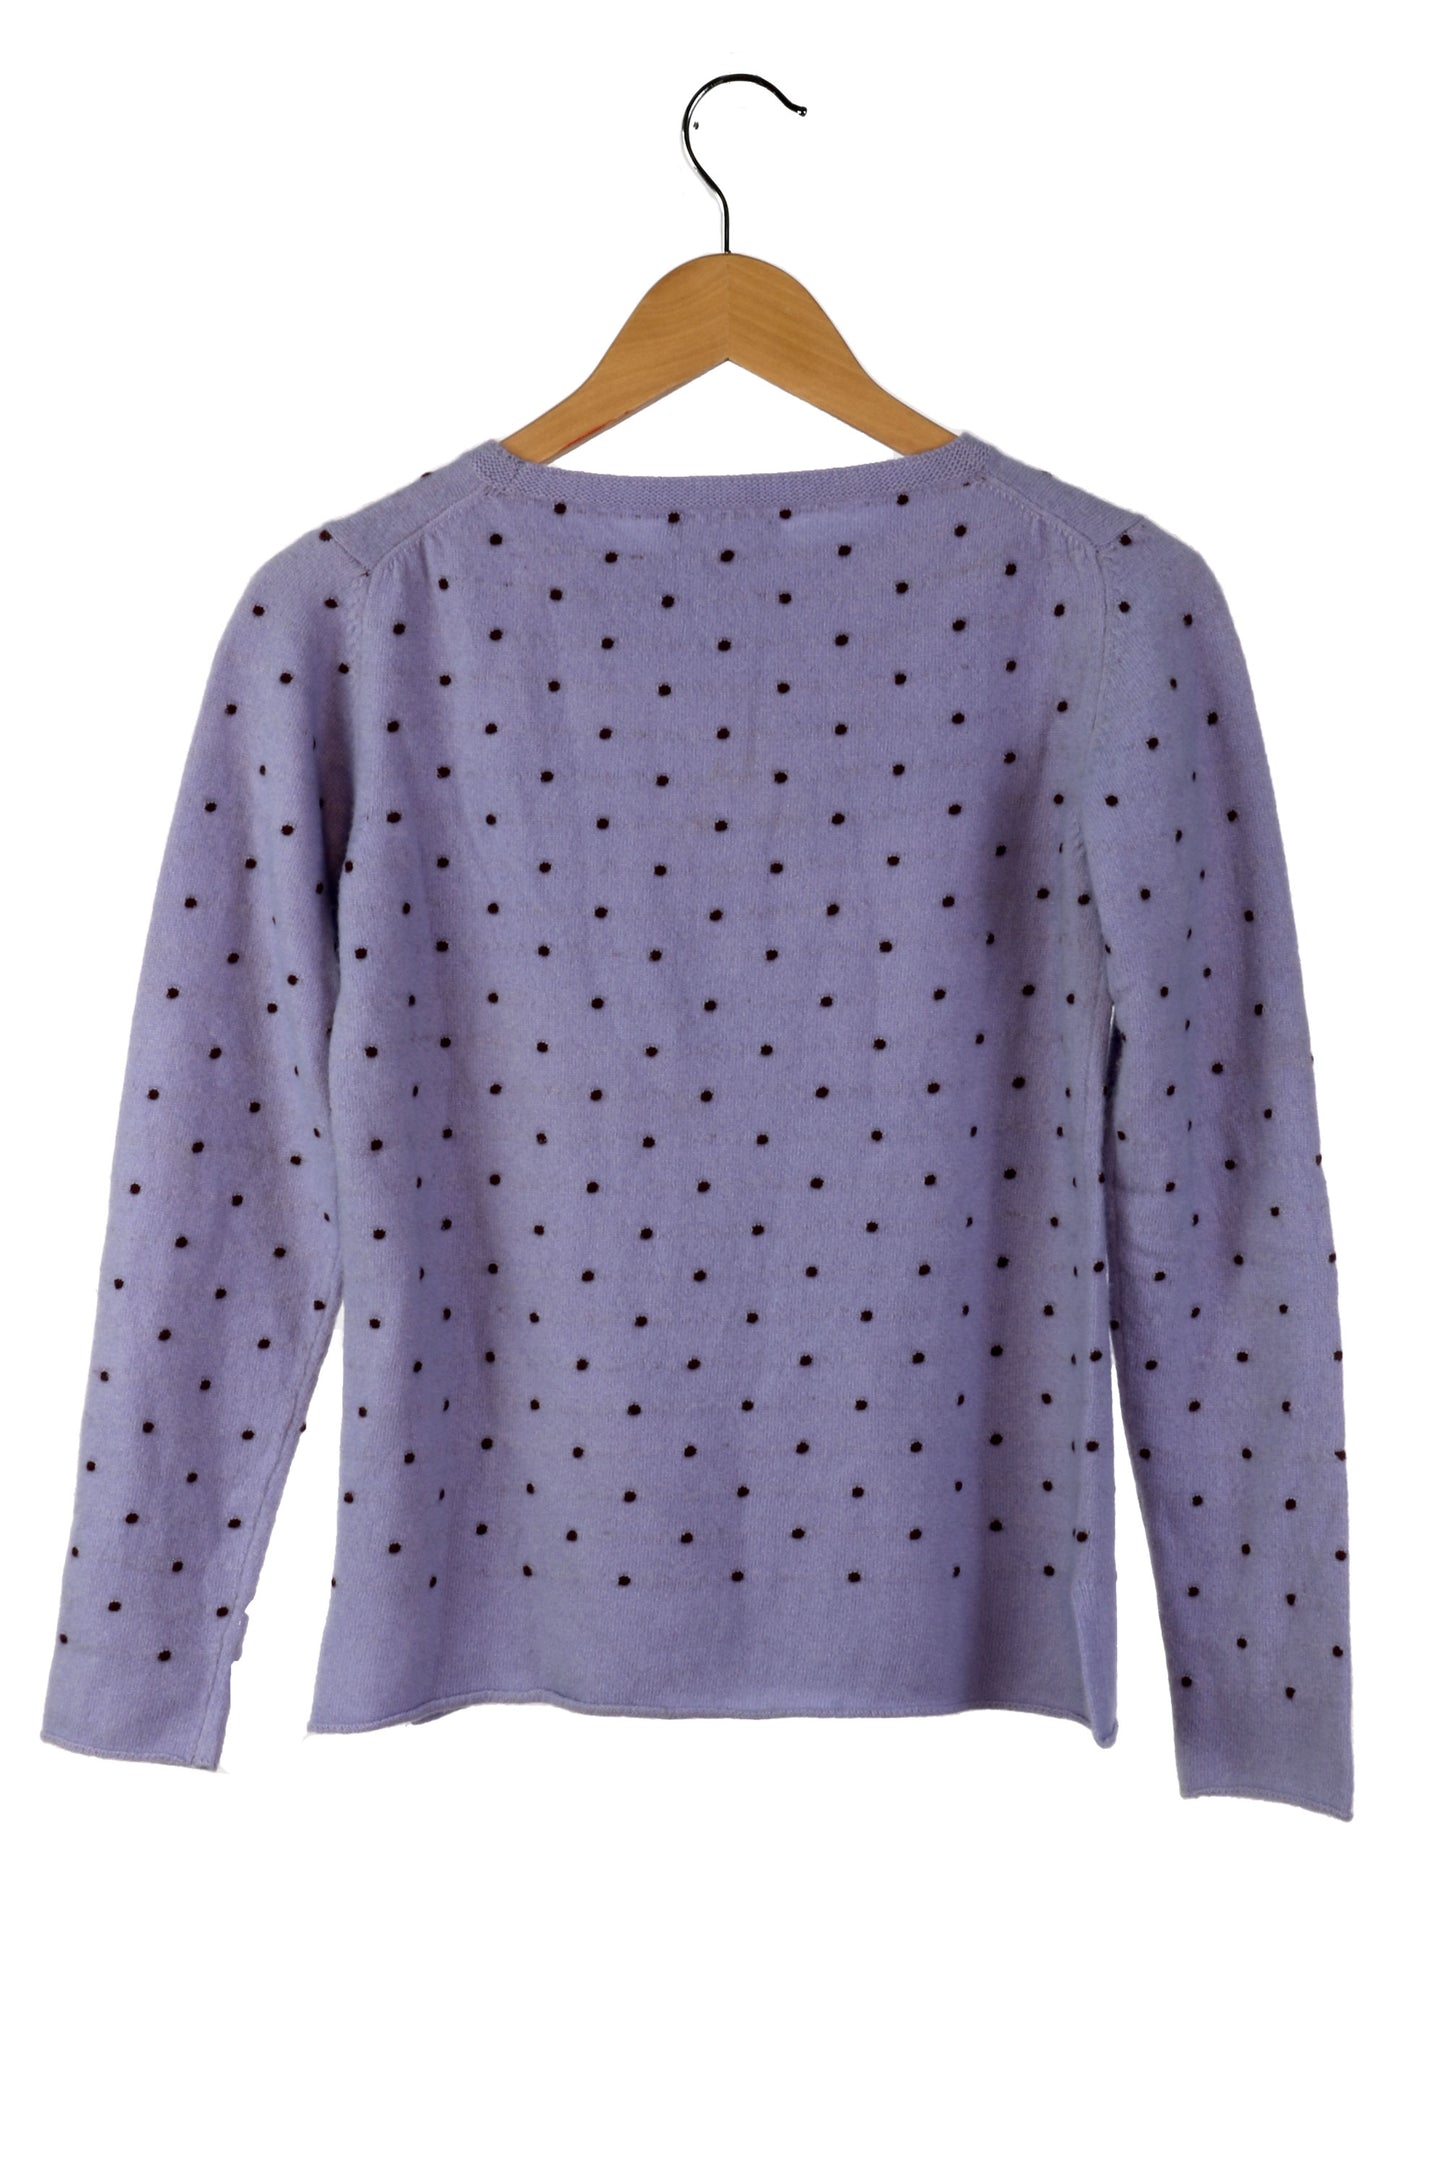 100% Cashmere Blue With Black Polka Dots Sweater Medium